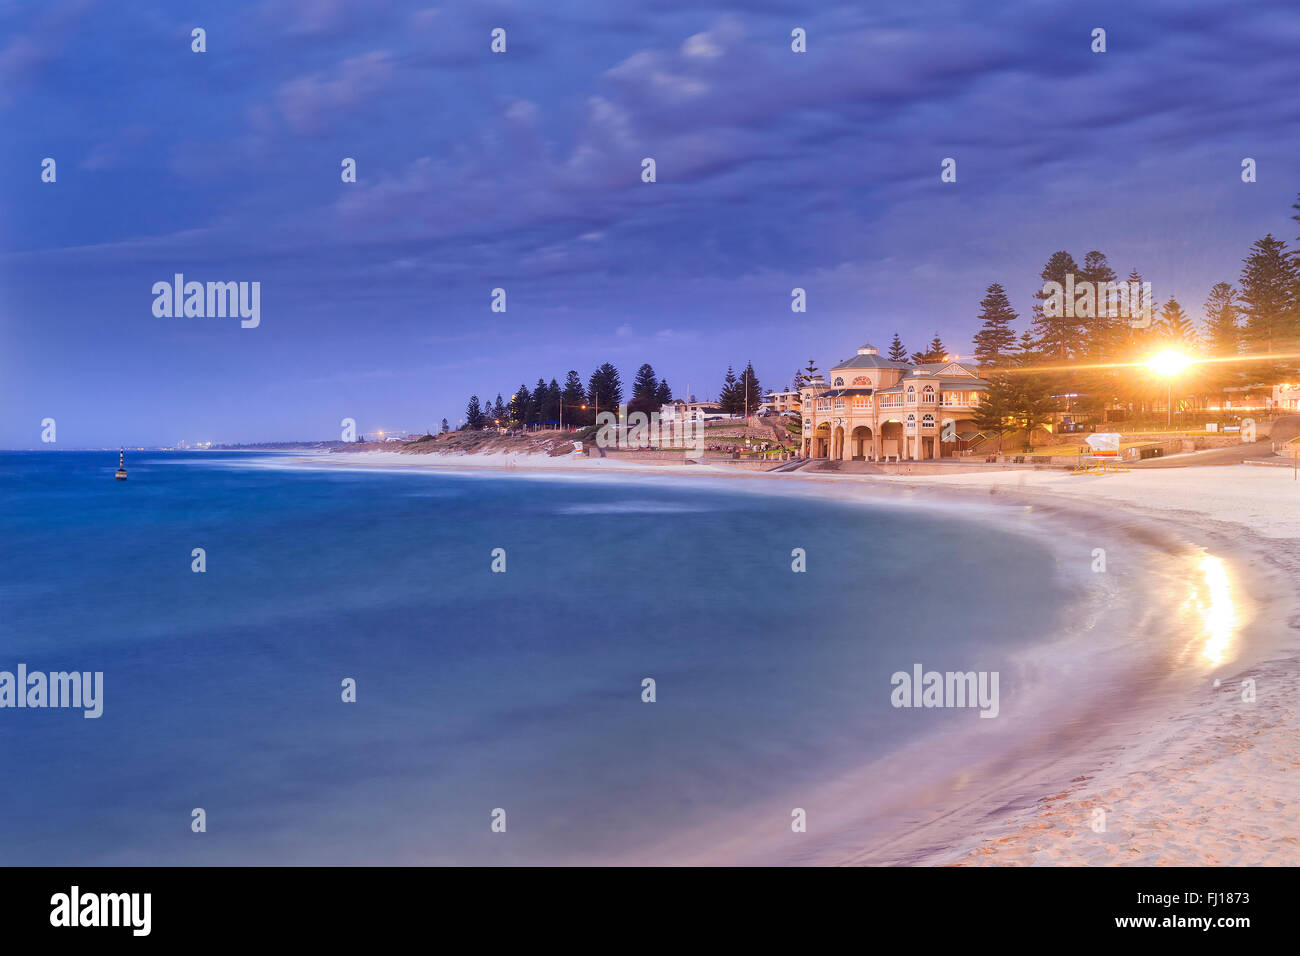 Perth western Indian ocean facing sandy beach Cottesloe at sunset. Central pavilion with lights and trees above blurred waves Stock Photo